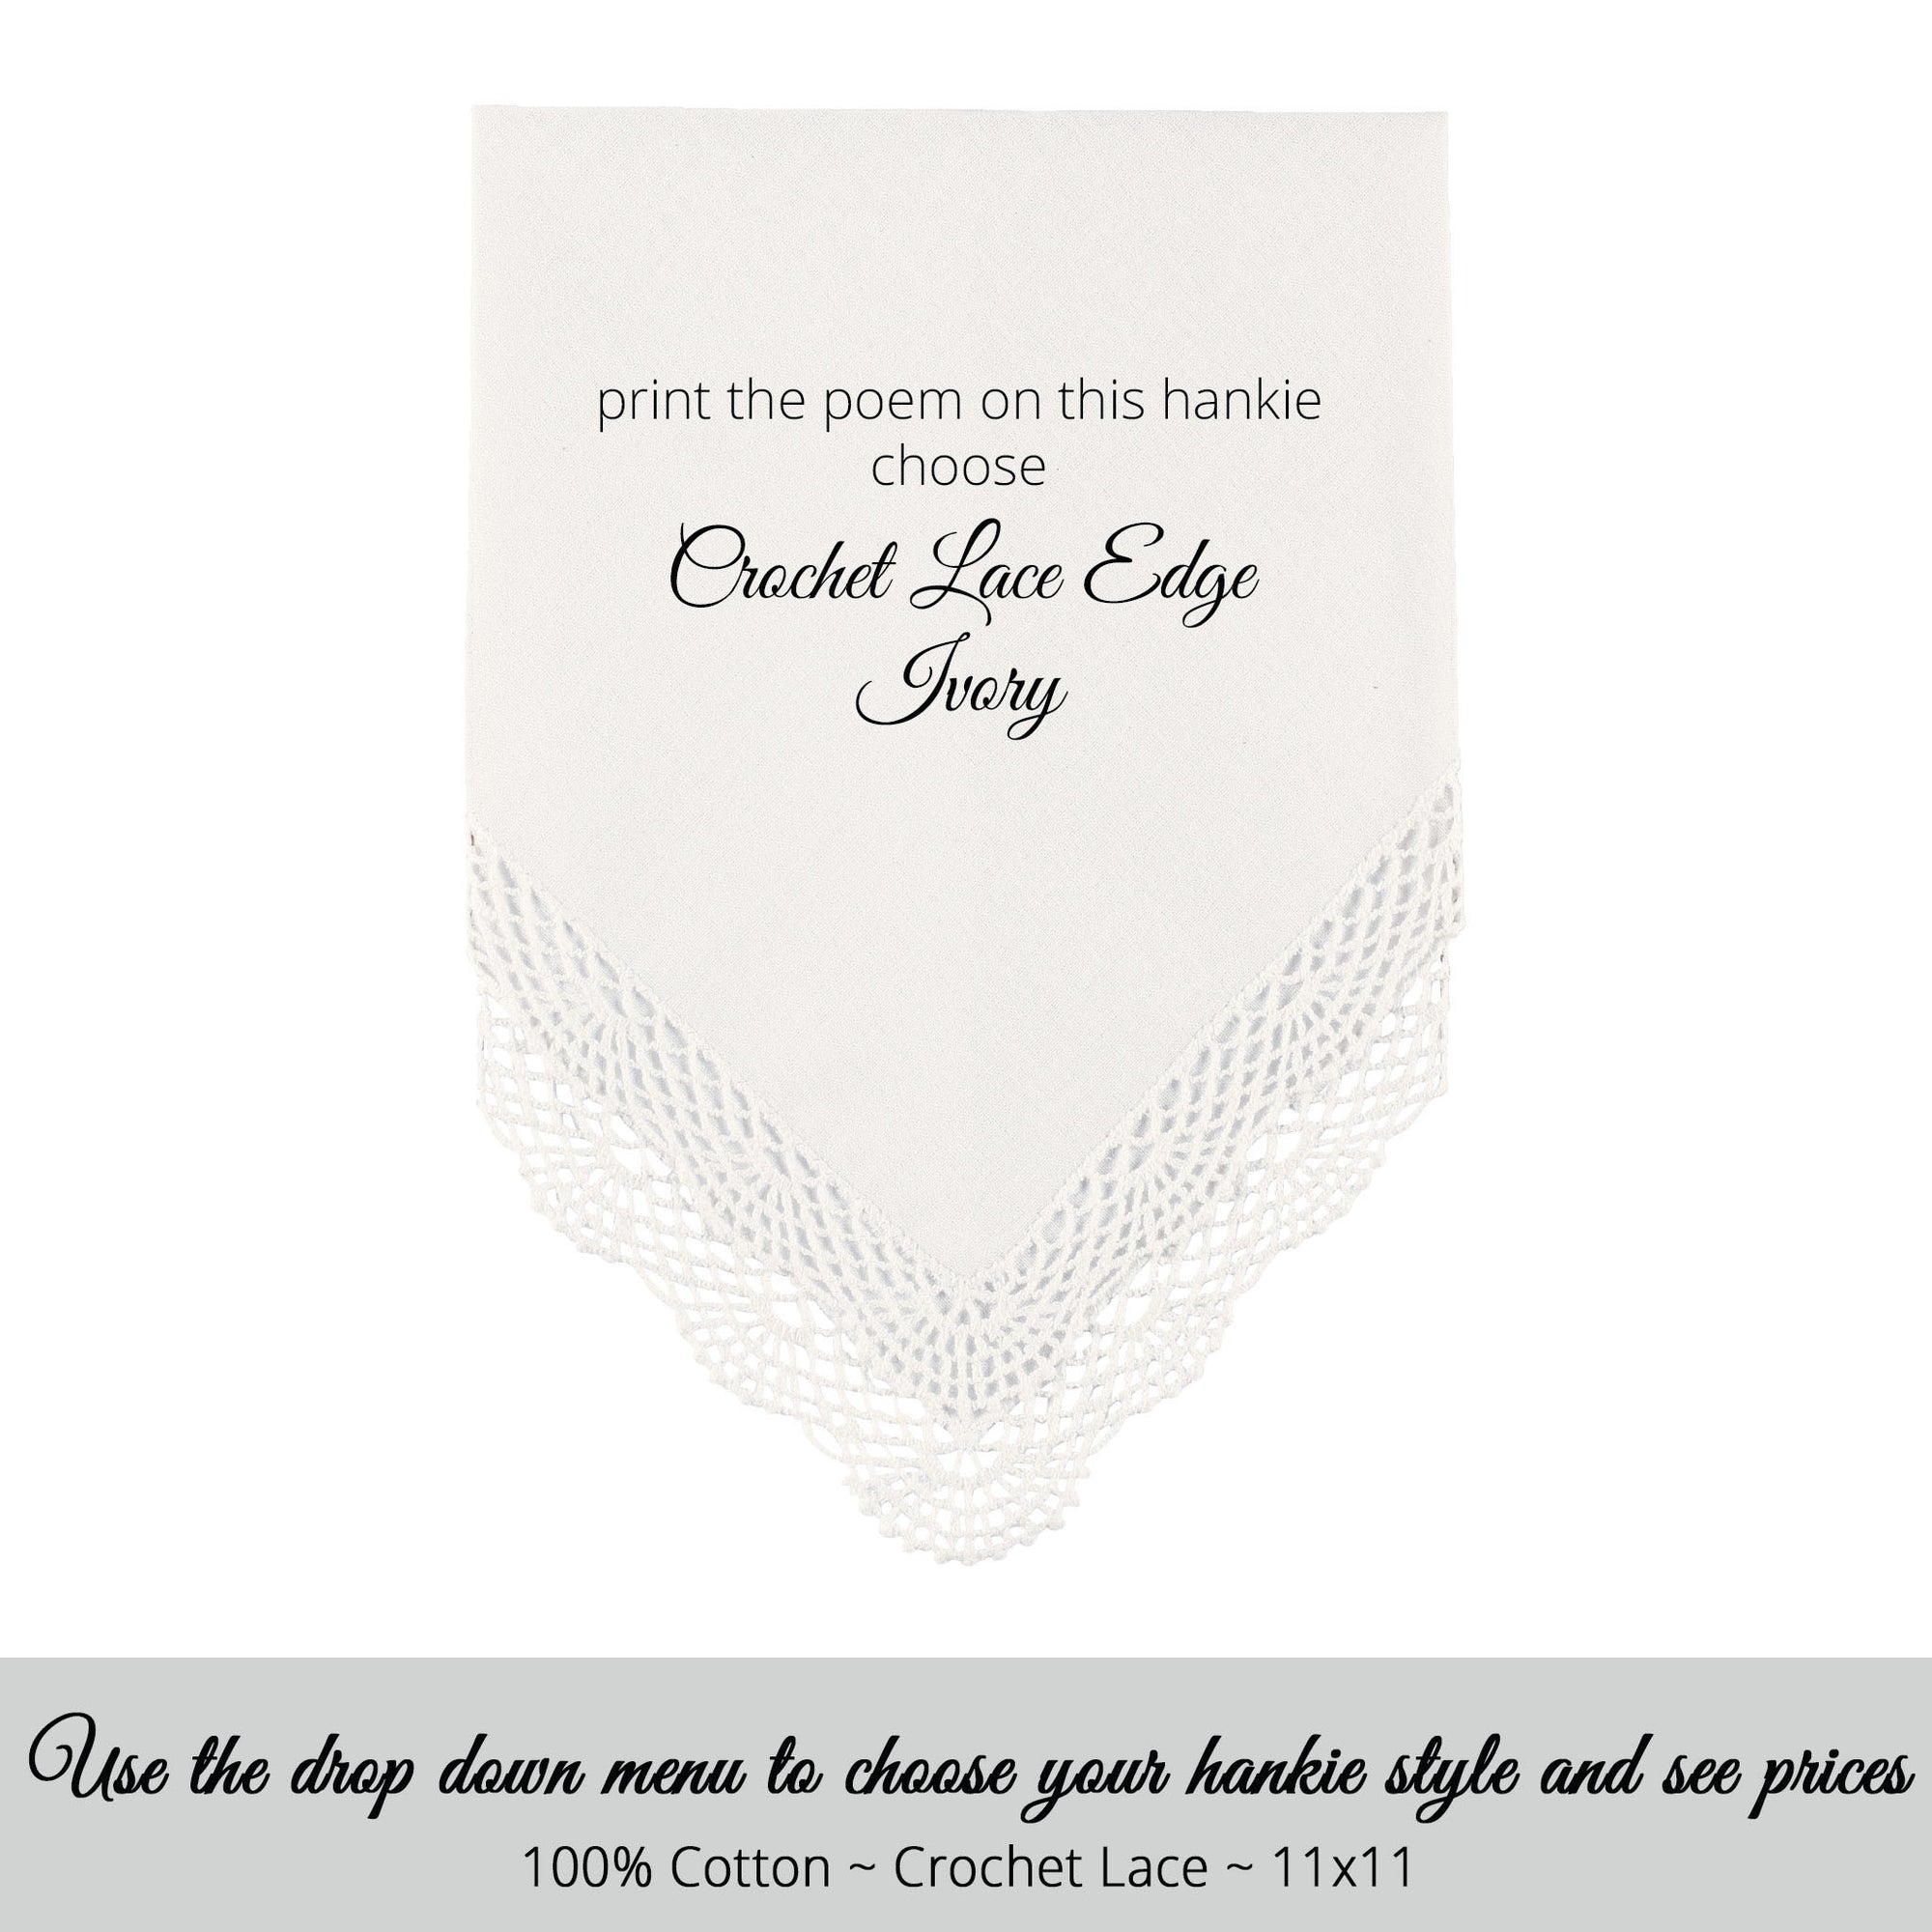 Wedding handkerchief ivory with crochet lace edge personalized for the bride